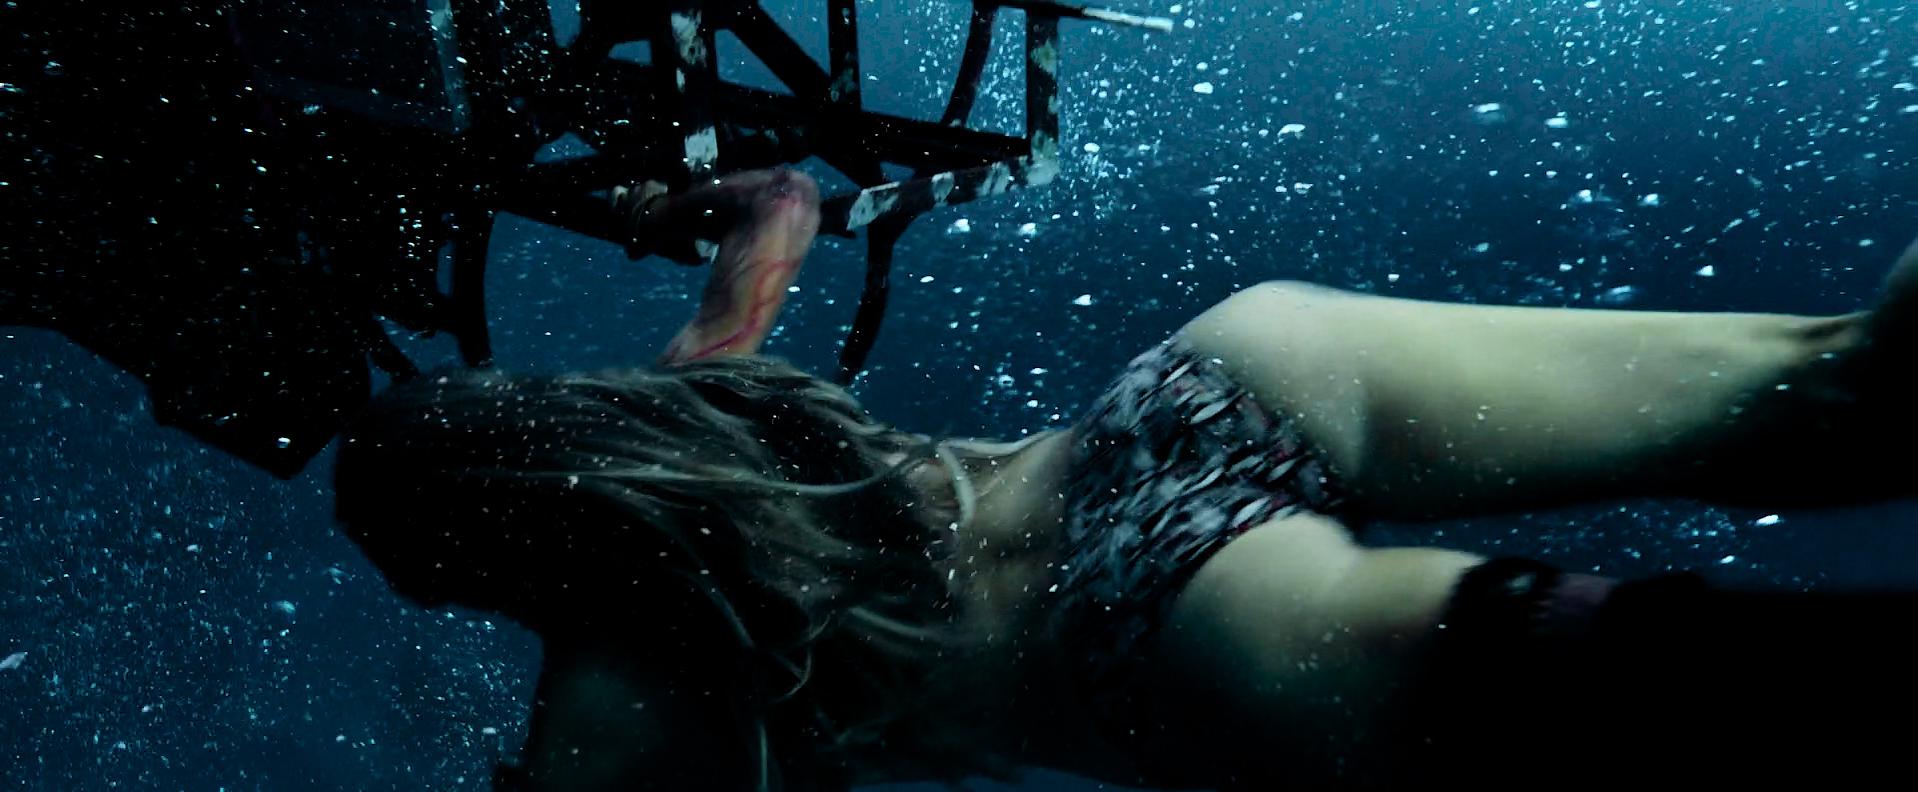 Nude Video Celebs Blake Lively Sexy The Shallows 2016